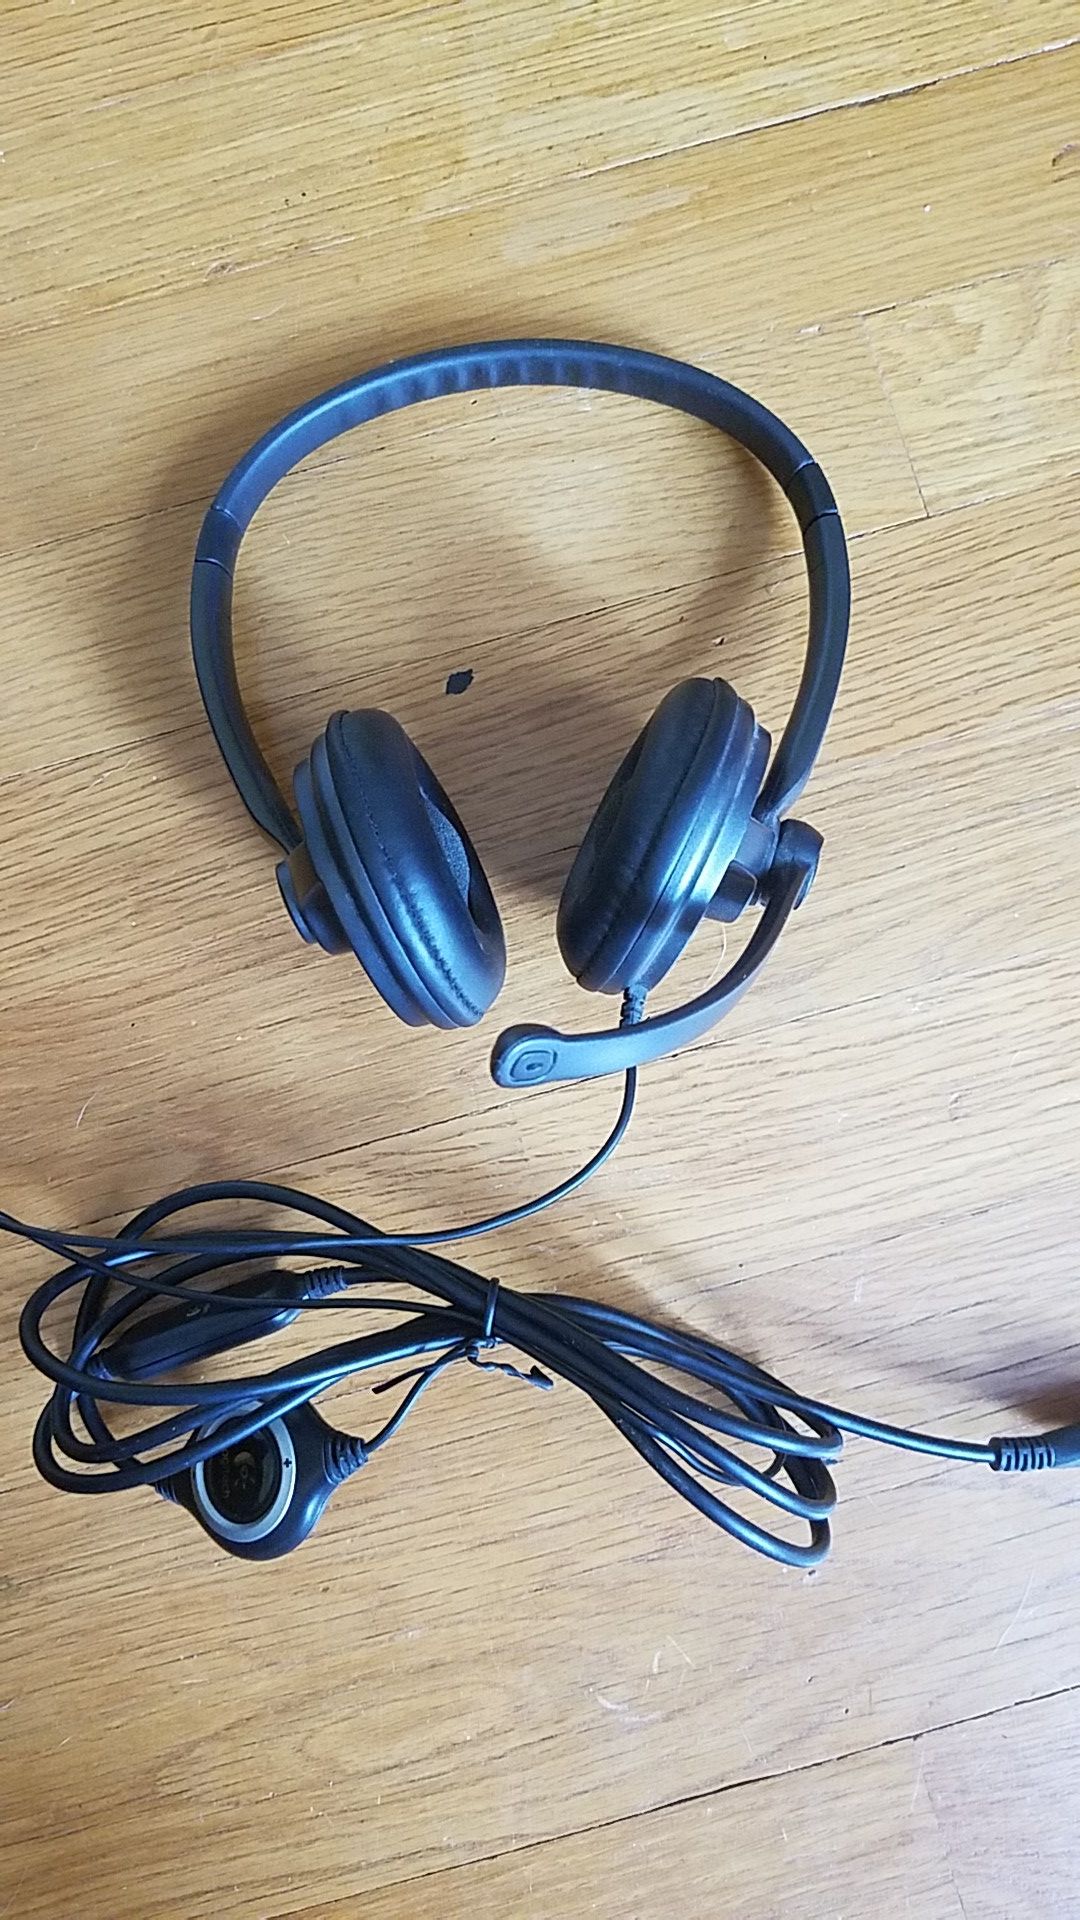 Logitech headset with microphone